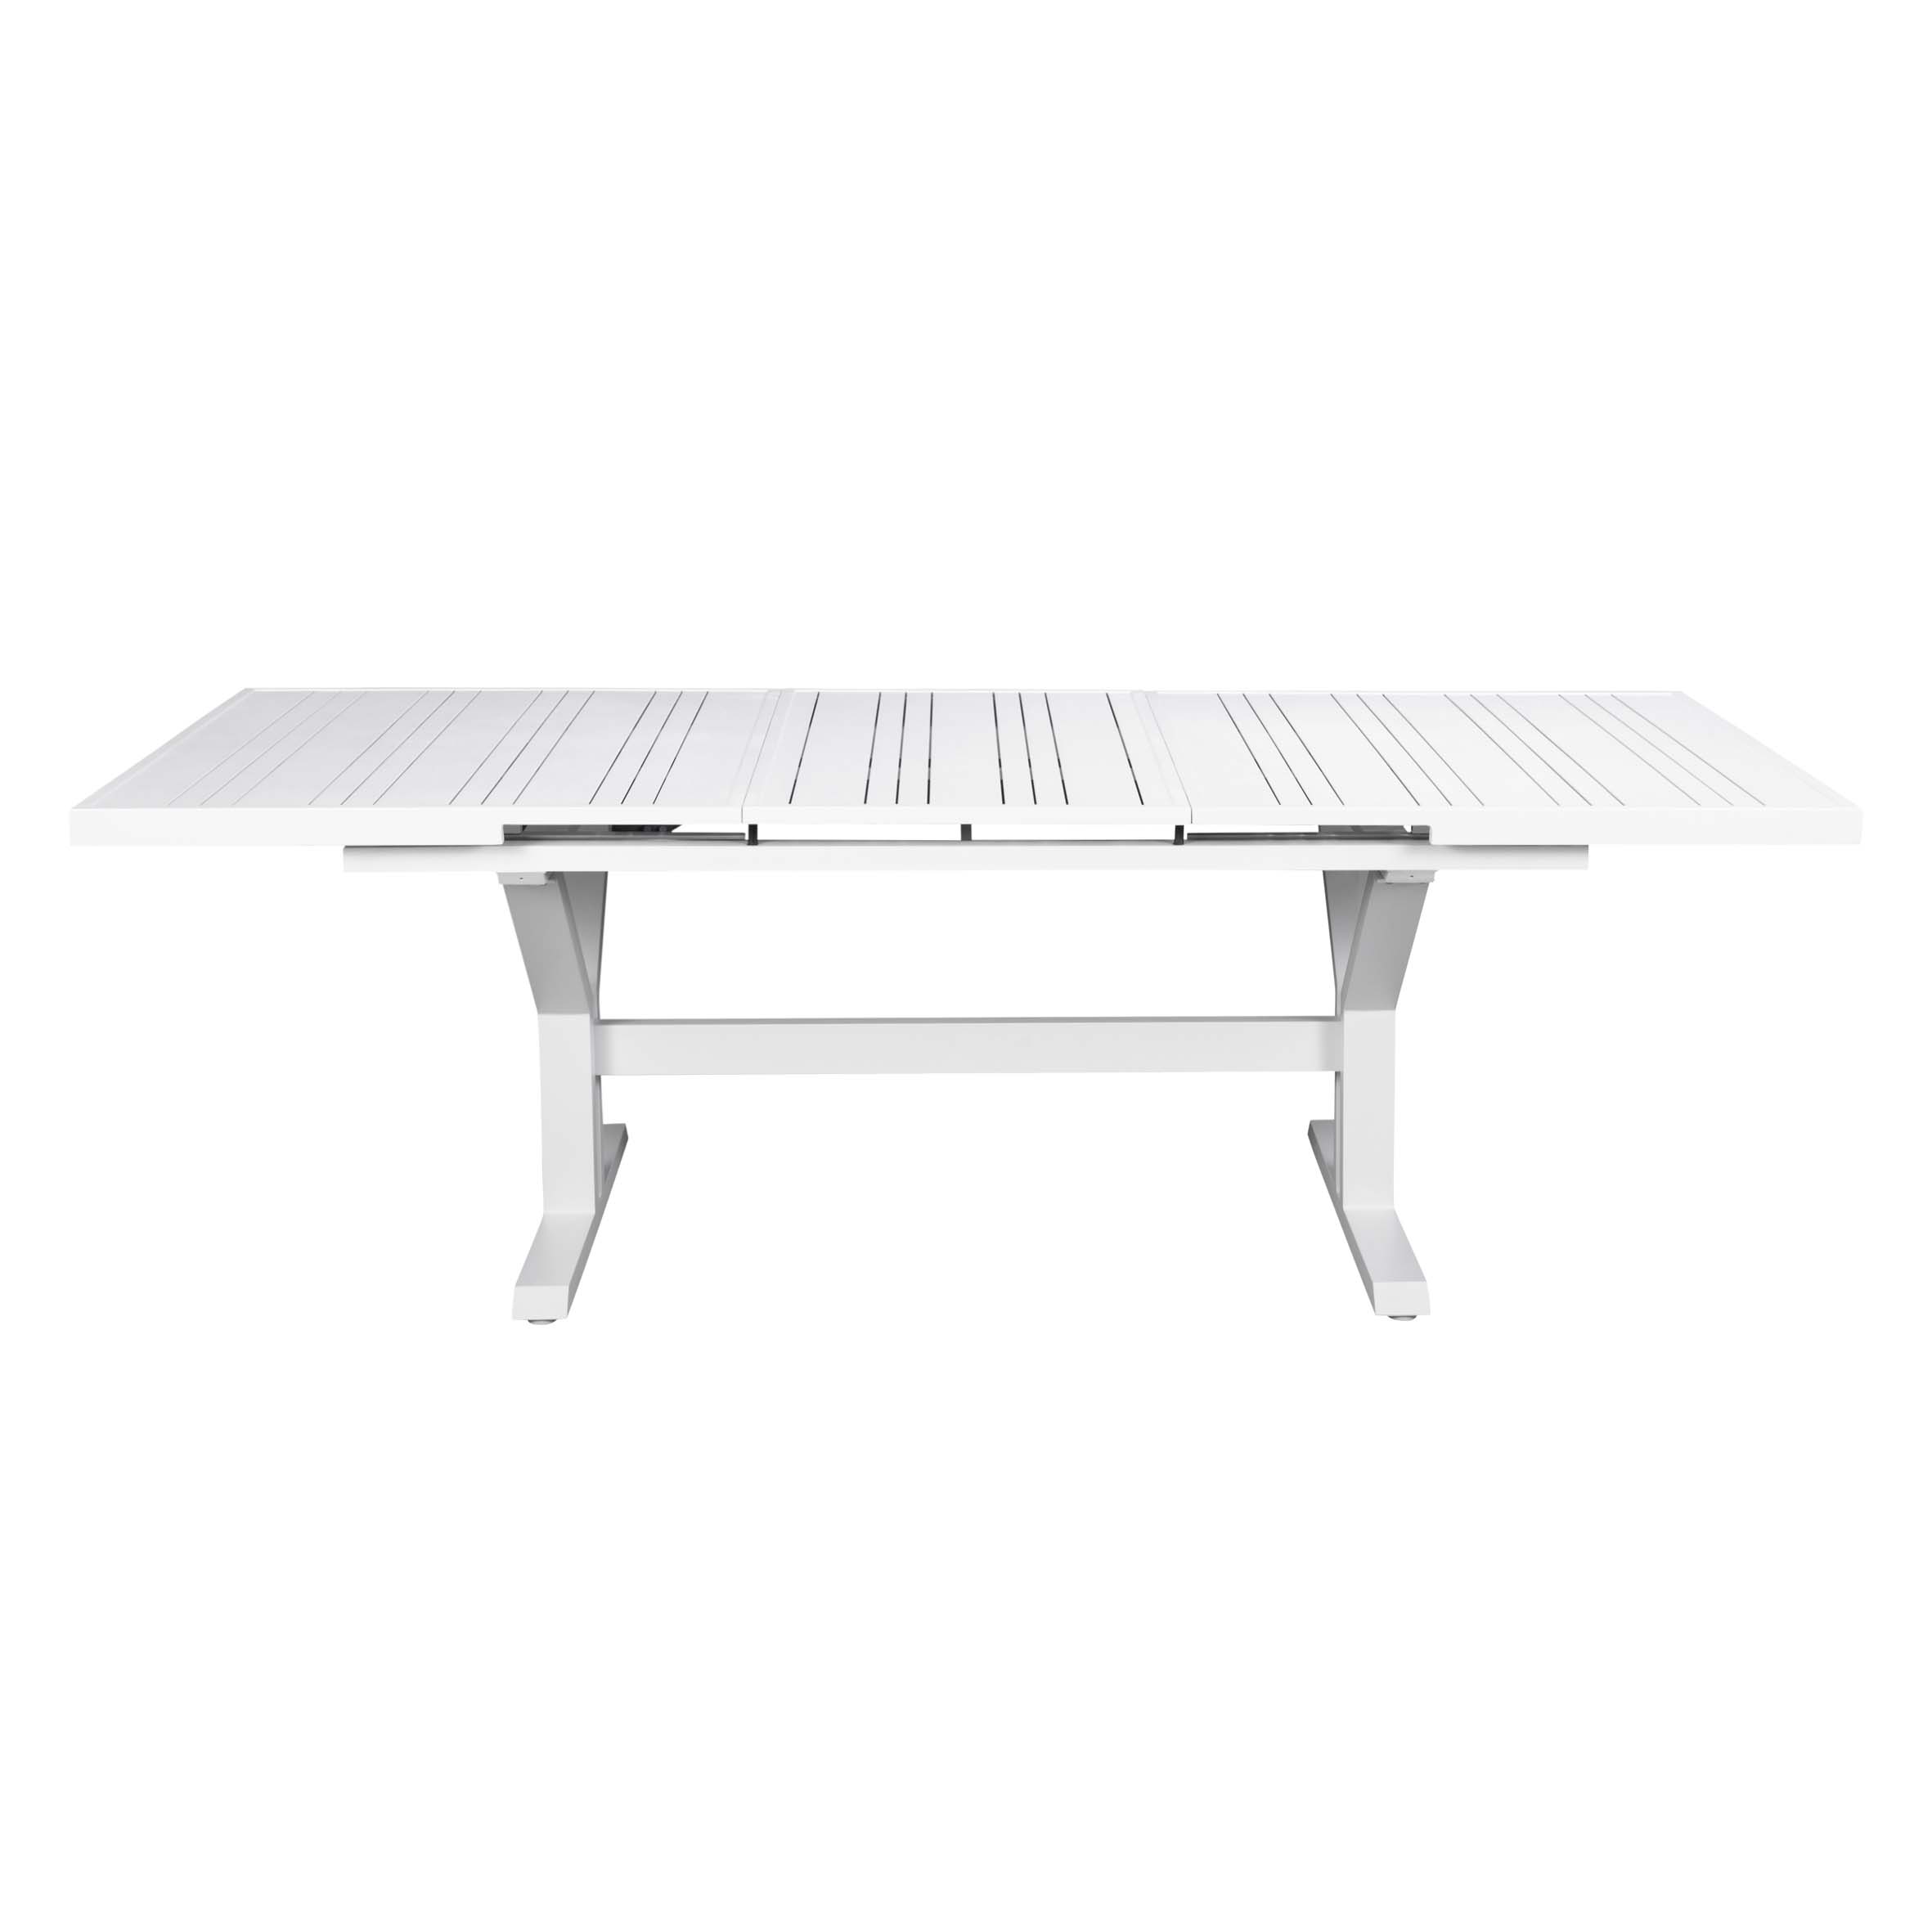 Tiffany outomatiese uitbreiding tafel S4